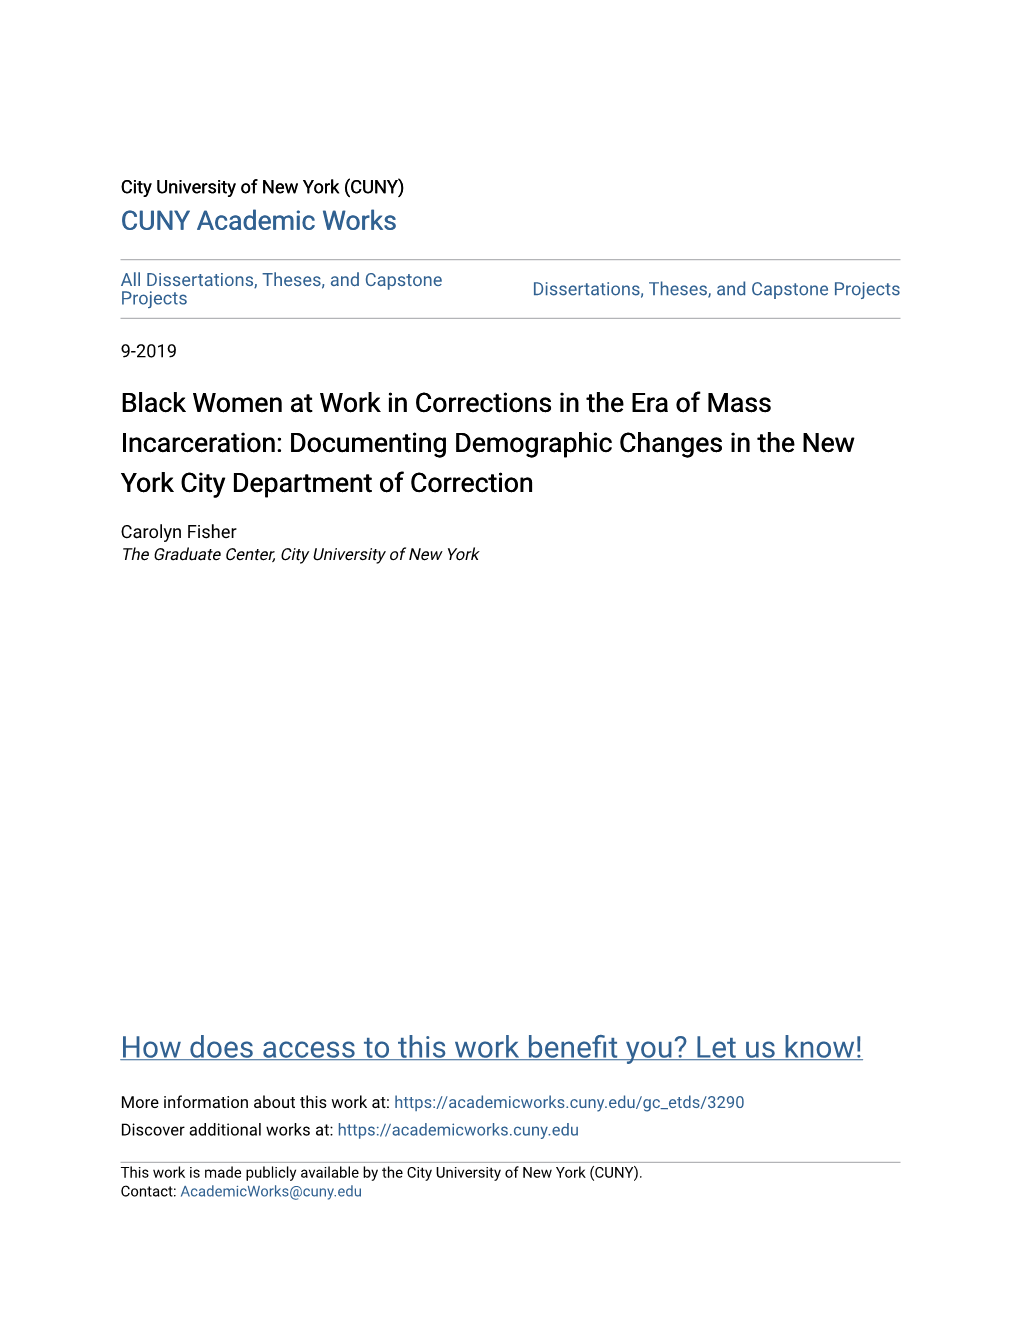 Black Women at Work in Corrections in the Era of Mass Incarceration: Documenting Demographic Changes in the New York City Department of Correction